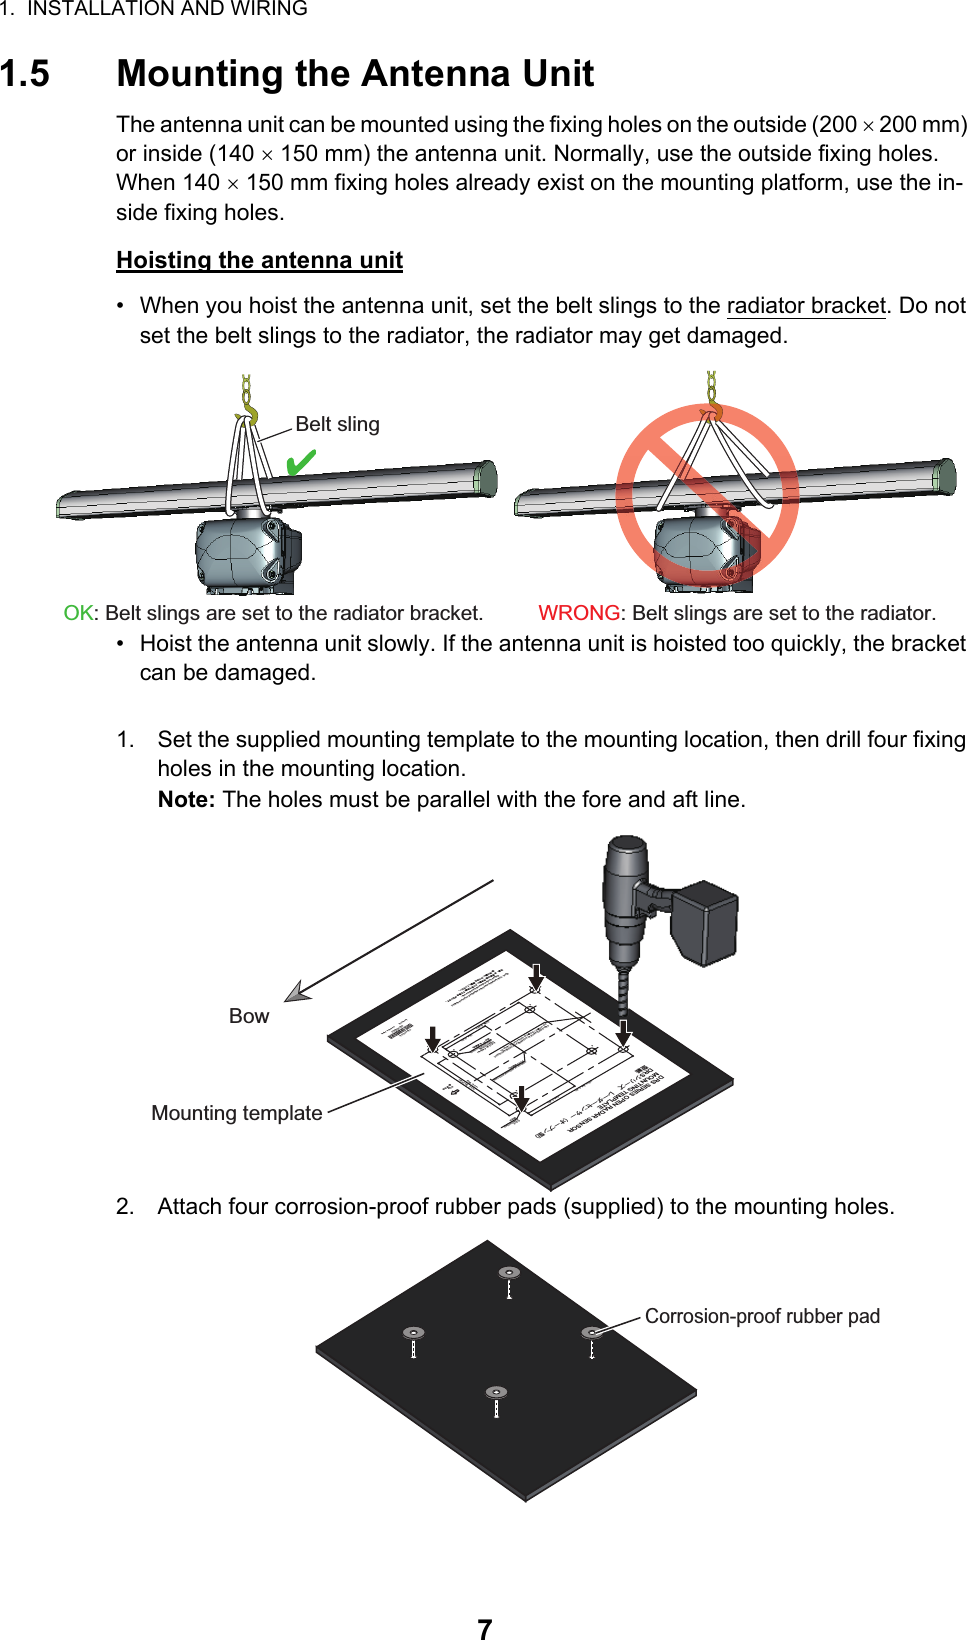 1.  INSTALLATION AND WIRING71.5 Mounting the Antenna UnitThe antenna unit can be mounted using the fixing holes on the outside (200  200 mm) or inside (140  150 mm) the antenna unit. Normally, use the outside fixing holes. When 140  150 mm fixing holes already exist on the mounting platform, use the in-side fixing holes.Hoisting the antenna unit•  When you hoist the antenna unit, set the belt slings to the radiator bracket. Do not set the belt slings to the radiator, the radiator may get damaged.•  Hoist the antenna unit slowly. If the antenna unit is hoisted too quickly, the bracket can be damaged.1. Set the supplied mounting template to the mounting location, then drill four fixing holes in the mounting location.Note: The holes must be parallel with the fore and aft line.2. Attach four corrosion-proof rubber pads (supplied) to the mounting holes.WRONG: Belt slings are set to the radiator. OK: Belt slings are set to the radiator bracket. Belt slingCABLE ENTRANCE AT SCANNER FOR DRS4A/6A/12A/25A䝇䜻䝱䝘ഃ䜿䞊䝤䝹ᑟධཱྀ䠄㻰㻾㻿㻠㻭㻛㻢㻭㻛㻝㻞㻭㻛㻞㻡㻭䛾䜏䠅PP&apos;&apos;)PP&apos;&apos;)sPP&apos;&apos;)PP&apos;&apos;)sPP&apos;&apos;)CENTER OF ANTENNA ROTATION䜰䞁䝔䝘ᅇ㌿୰ᚰPP&apos;&apos;)ྲྀ௜✰4-䃥15 FIXING HOLESྲྀ௜✰䚷㻔᥮⿦⏝㻕4-䃥15 (#: 4 places) FIXING HOLES( FOR RETROFITTING)Note:  This template may have expanded or shrunk slightly.            Please confirm dimensions before use.ὀព㻦㻌㻌ᮏᆺ⣬䛿ಖᏑ≧ែ䛻䜘䜚ⱝᖸఙ⦰䛩䜛ሙྜ䛜䛒䜚䜎䛩䚹㻌㻌㻌㻌㻌㻌㻌㻌㻌౑⏝䛾㝿䛻䛿ᑍἲ䜢☜ㄆ䛧䛶䛟䛰䛥䛔䚹㻌BOW⯪㤳᪉ྥJune 2015         Printed in JapanC32-00703-A1DRSシリーズ レーダーセンサー（オープン型）ᆺ⣬DRS SERIES OPEN RADAR SENSORMOUNTING TEMPLATE䢲䢲䢲䢳䢸䢹䢶䢷䢻䢳䢲BowBowMounting templateCorrosion-proof rubber pad